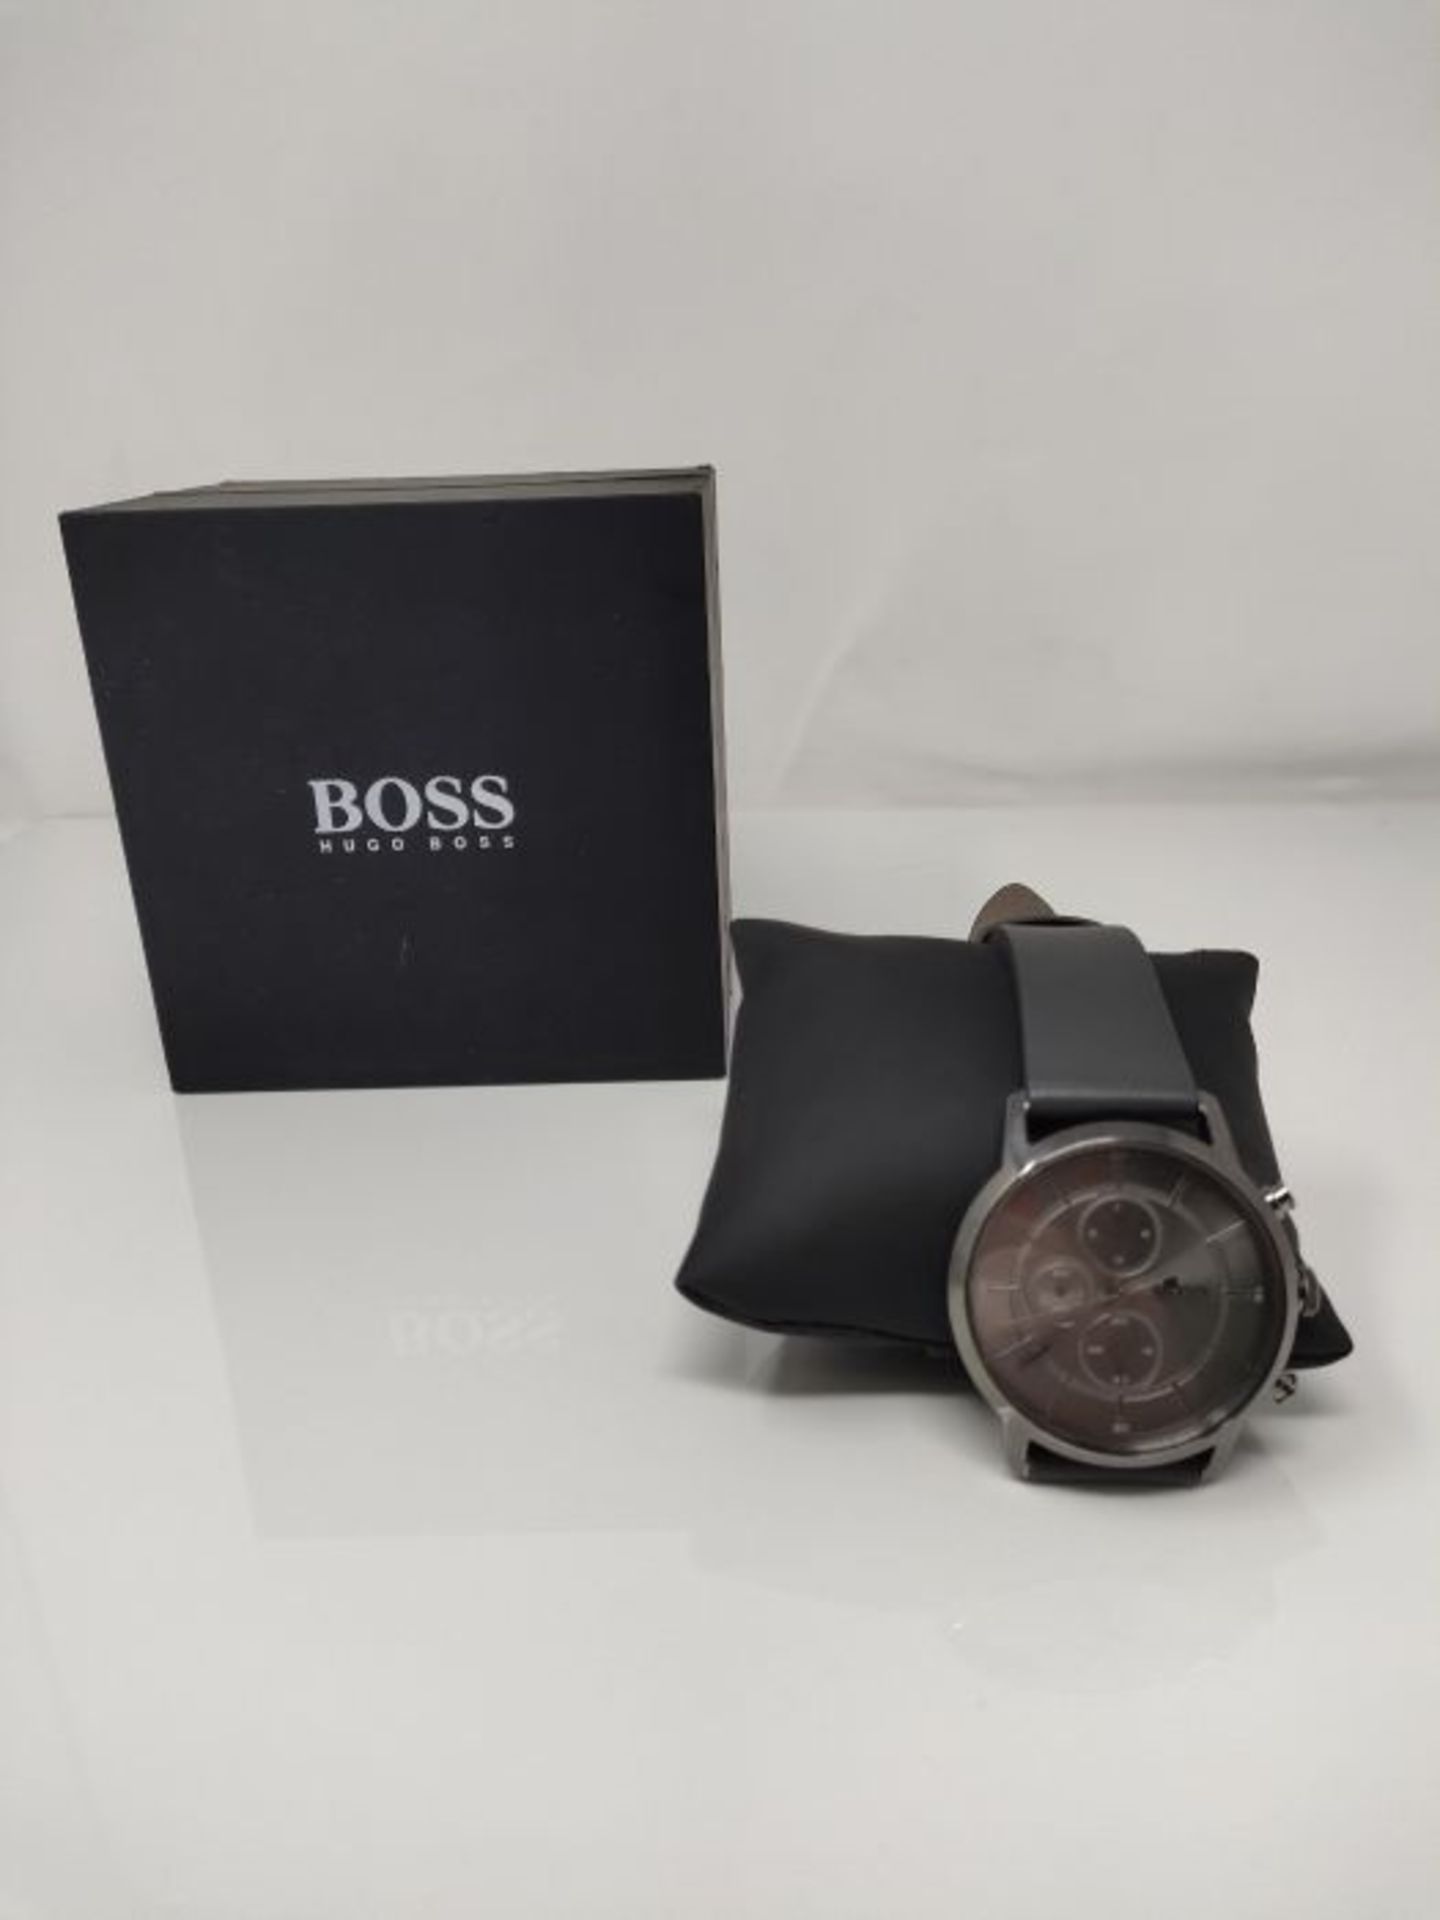 RRP £297.00 BOSS Unisex-Adult Chronograph Quartz Watch with Leather Strap 1513570 - Image 2 of 3